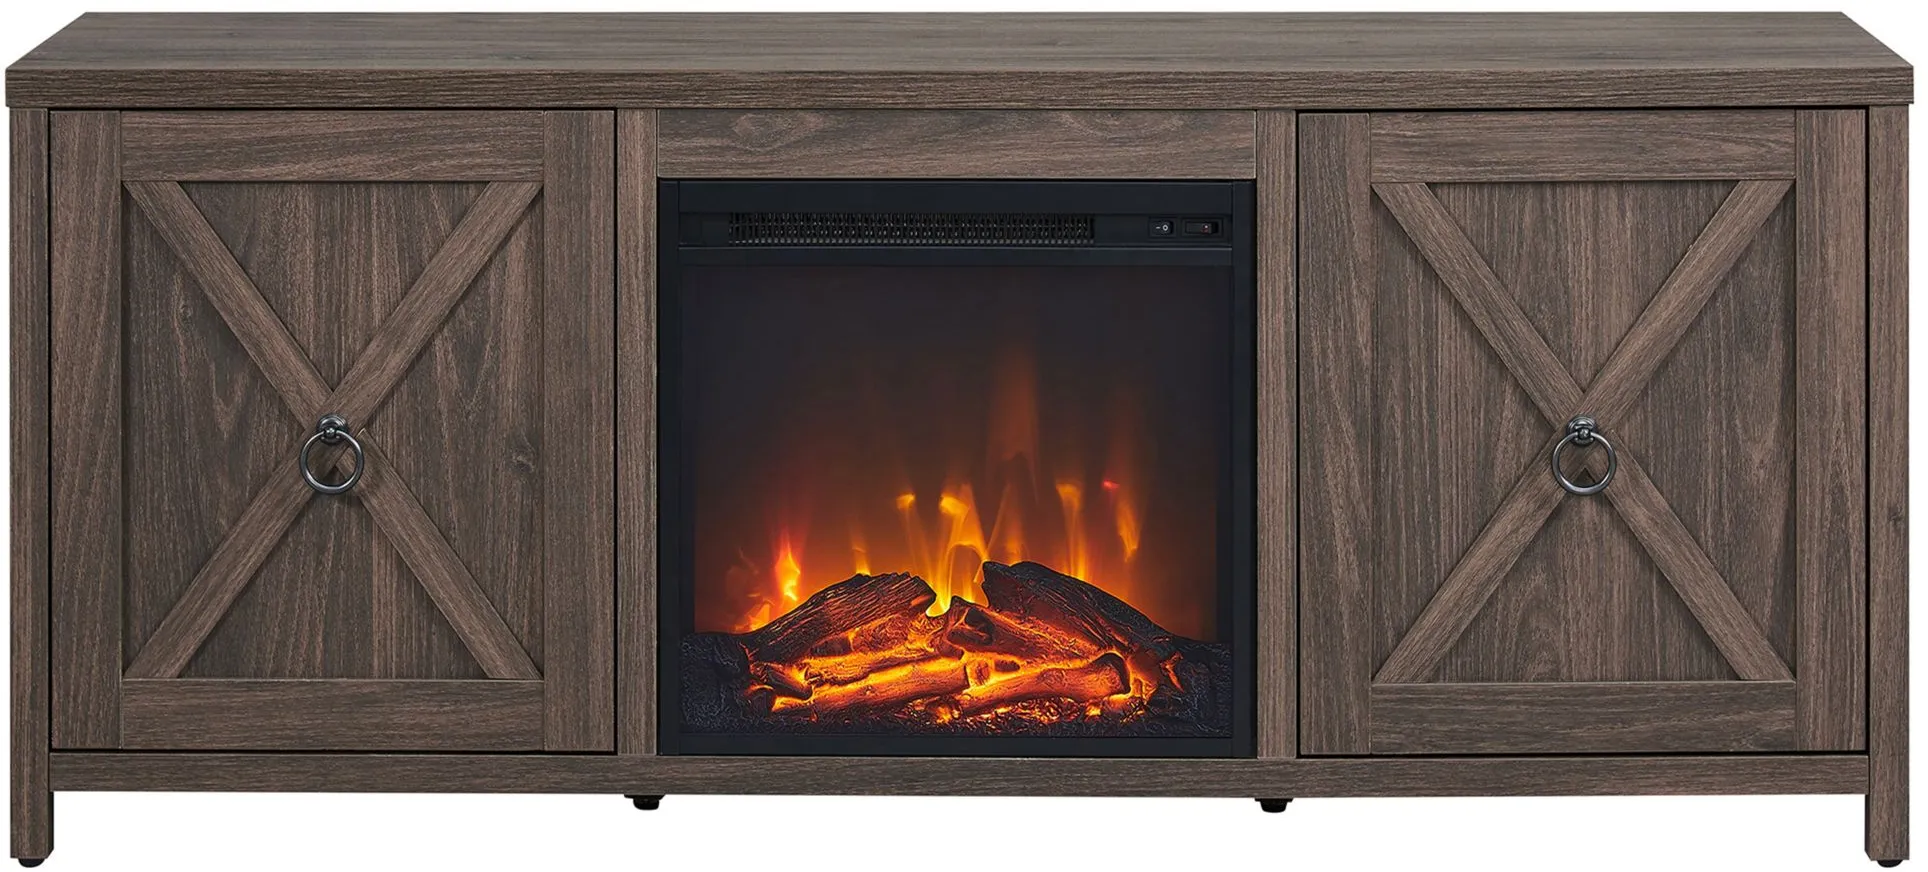 Taylor 58" TV Stand with Log Fireplace Insert in Alder Brown by Hudson & Canal